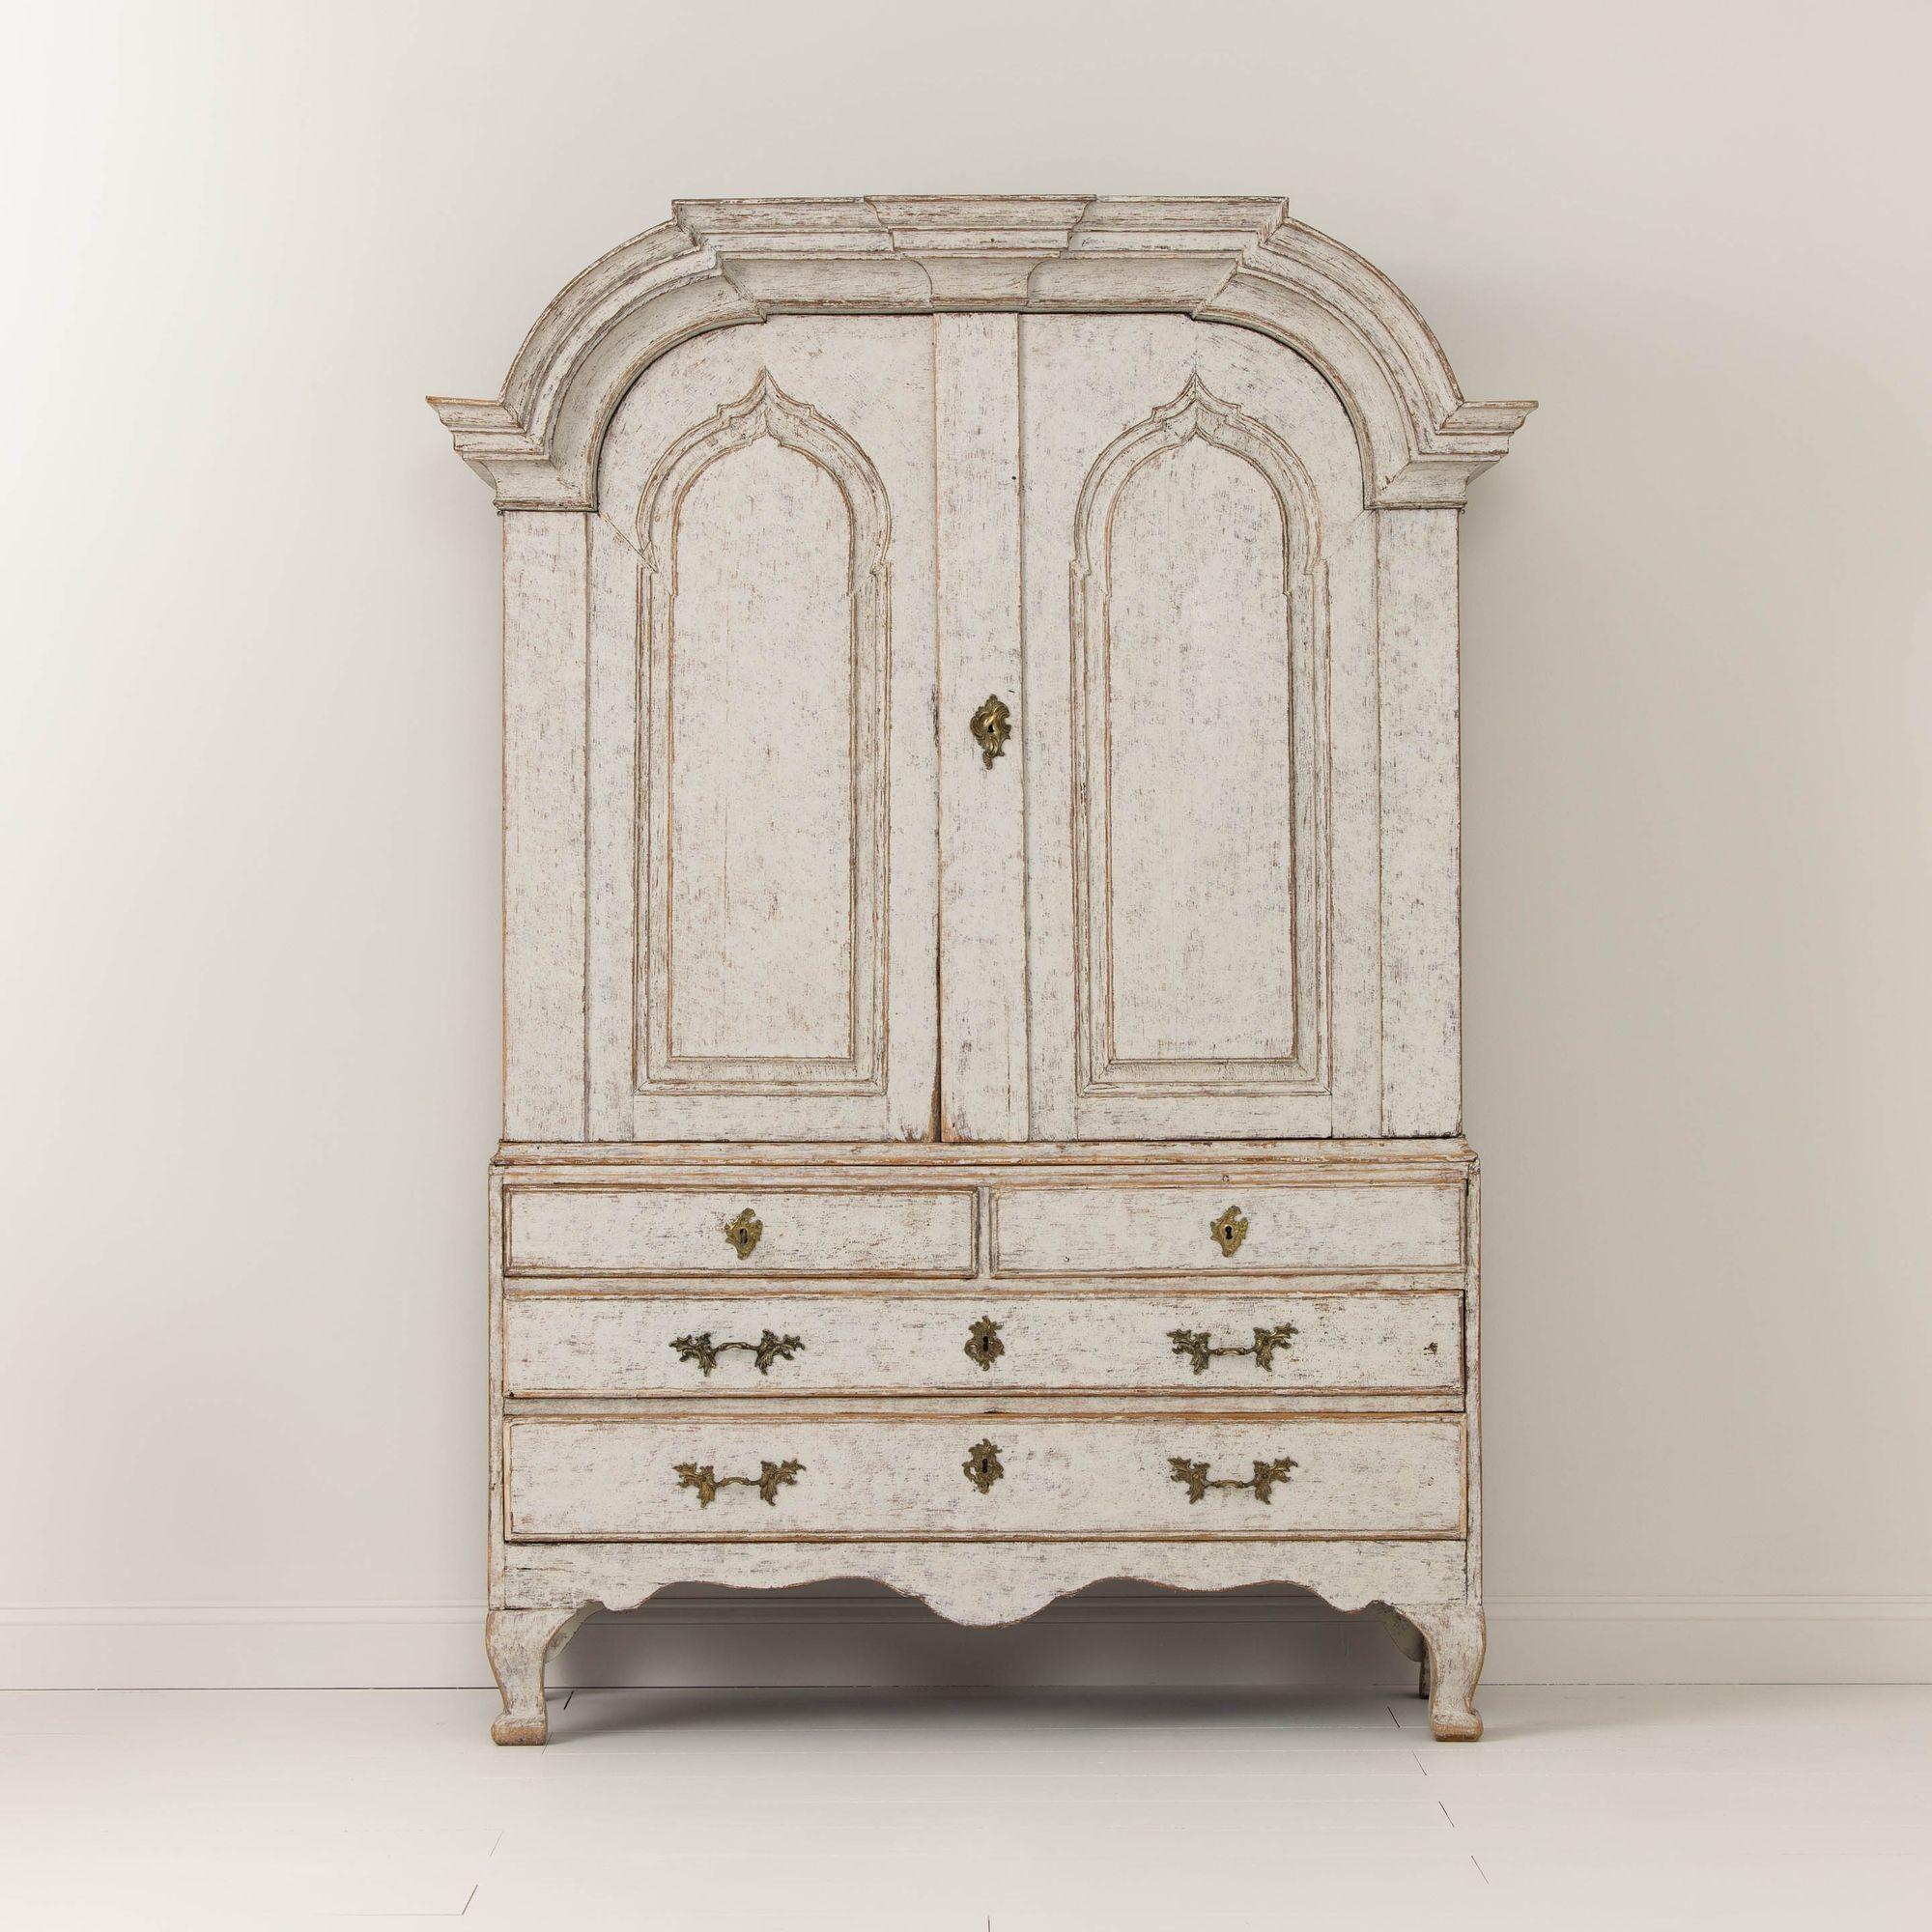 A Swedish painted linen press or armoire from the Rococo period, circa 1760. This piece is made in two parts with original locks and cast brass hardware. This cabinet is beautifully proportioned with a shaped pediment cornice, shaped apron, and